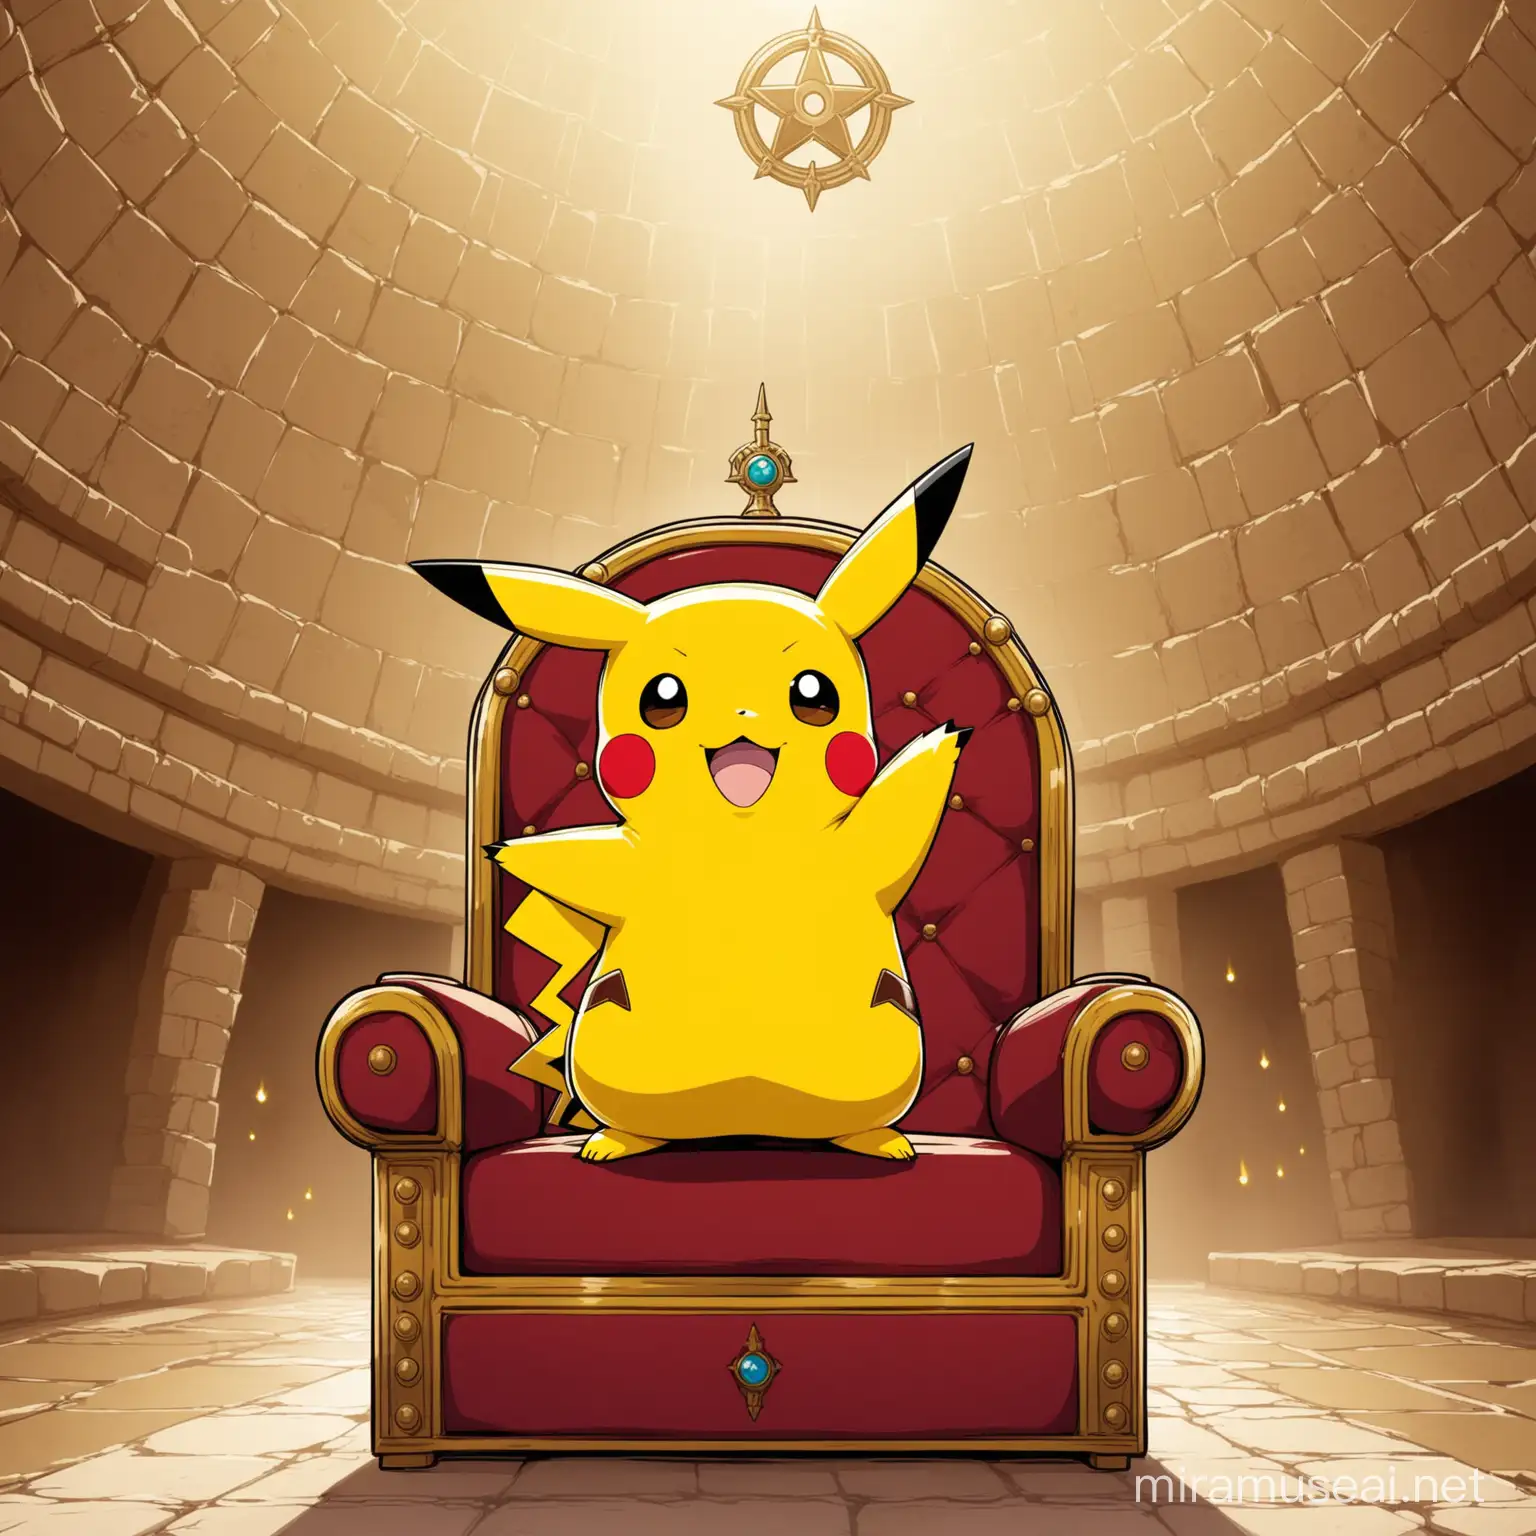 Pikachu becomes the Ottoman commander and goes to Constantine.
